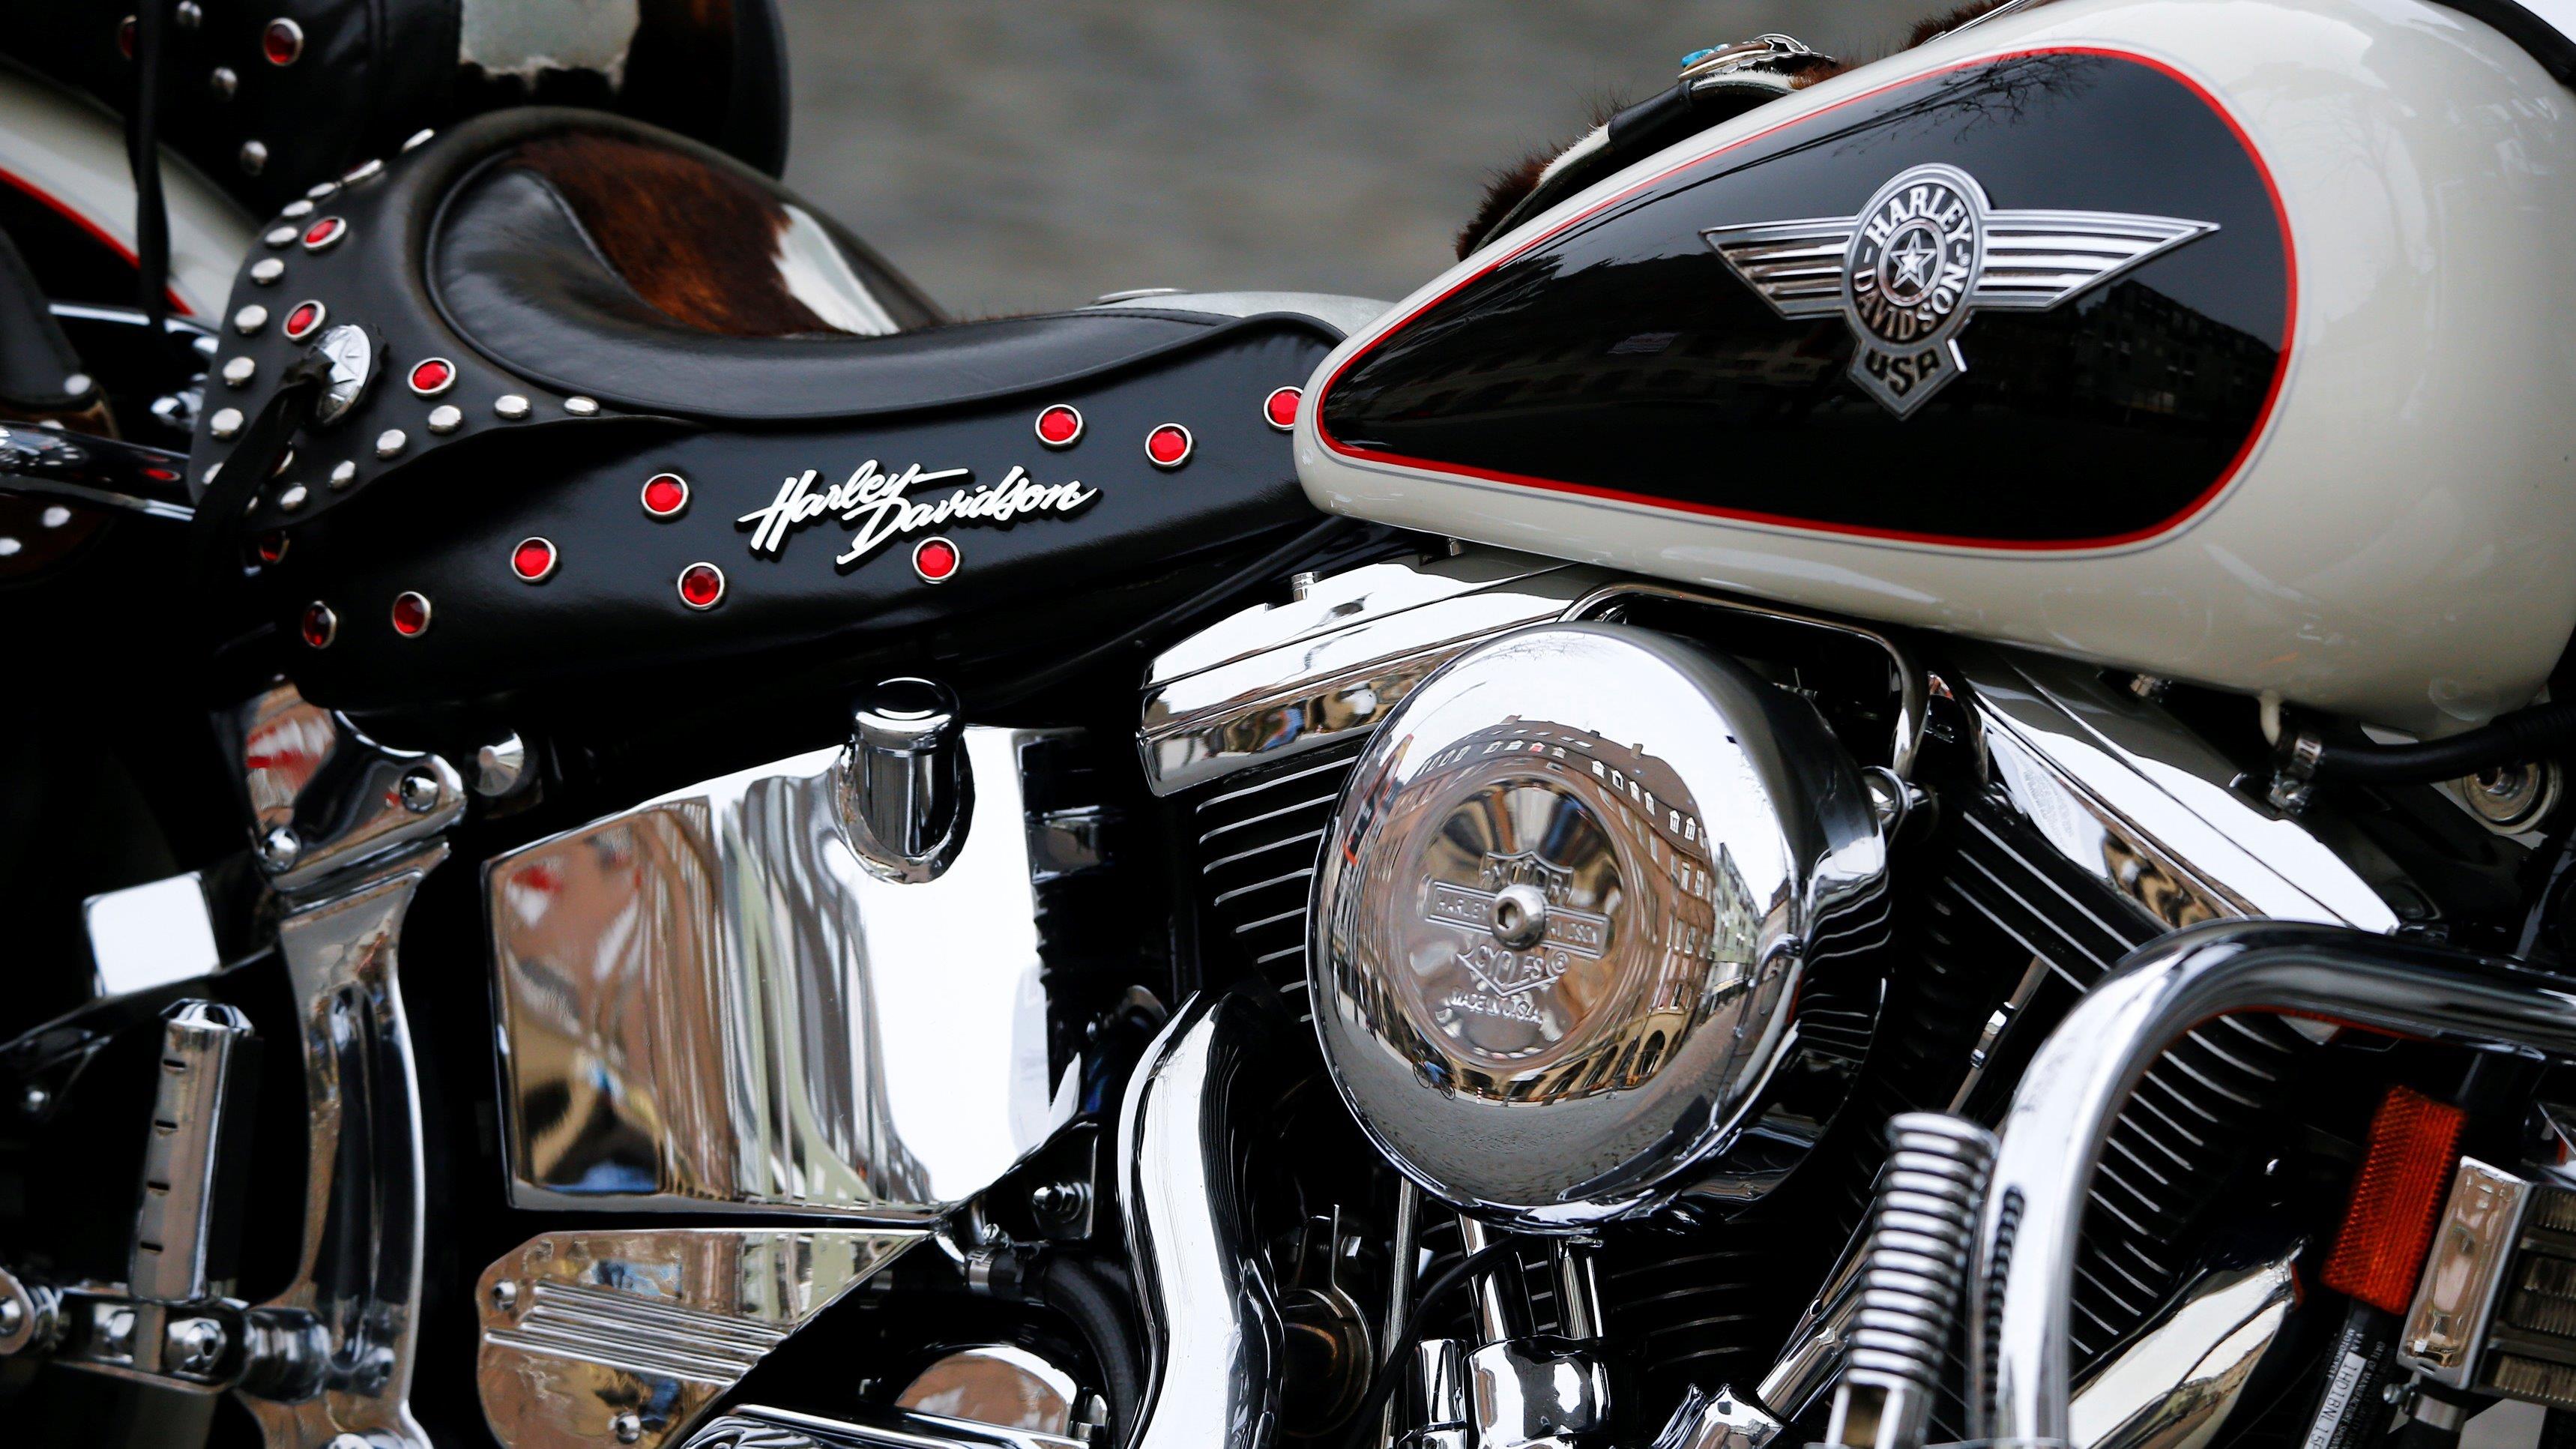 Harley-Davidson CEO Matt Levatich discusses sales, free-trade and his outlook for growth. 